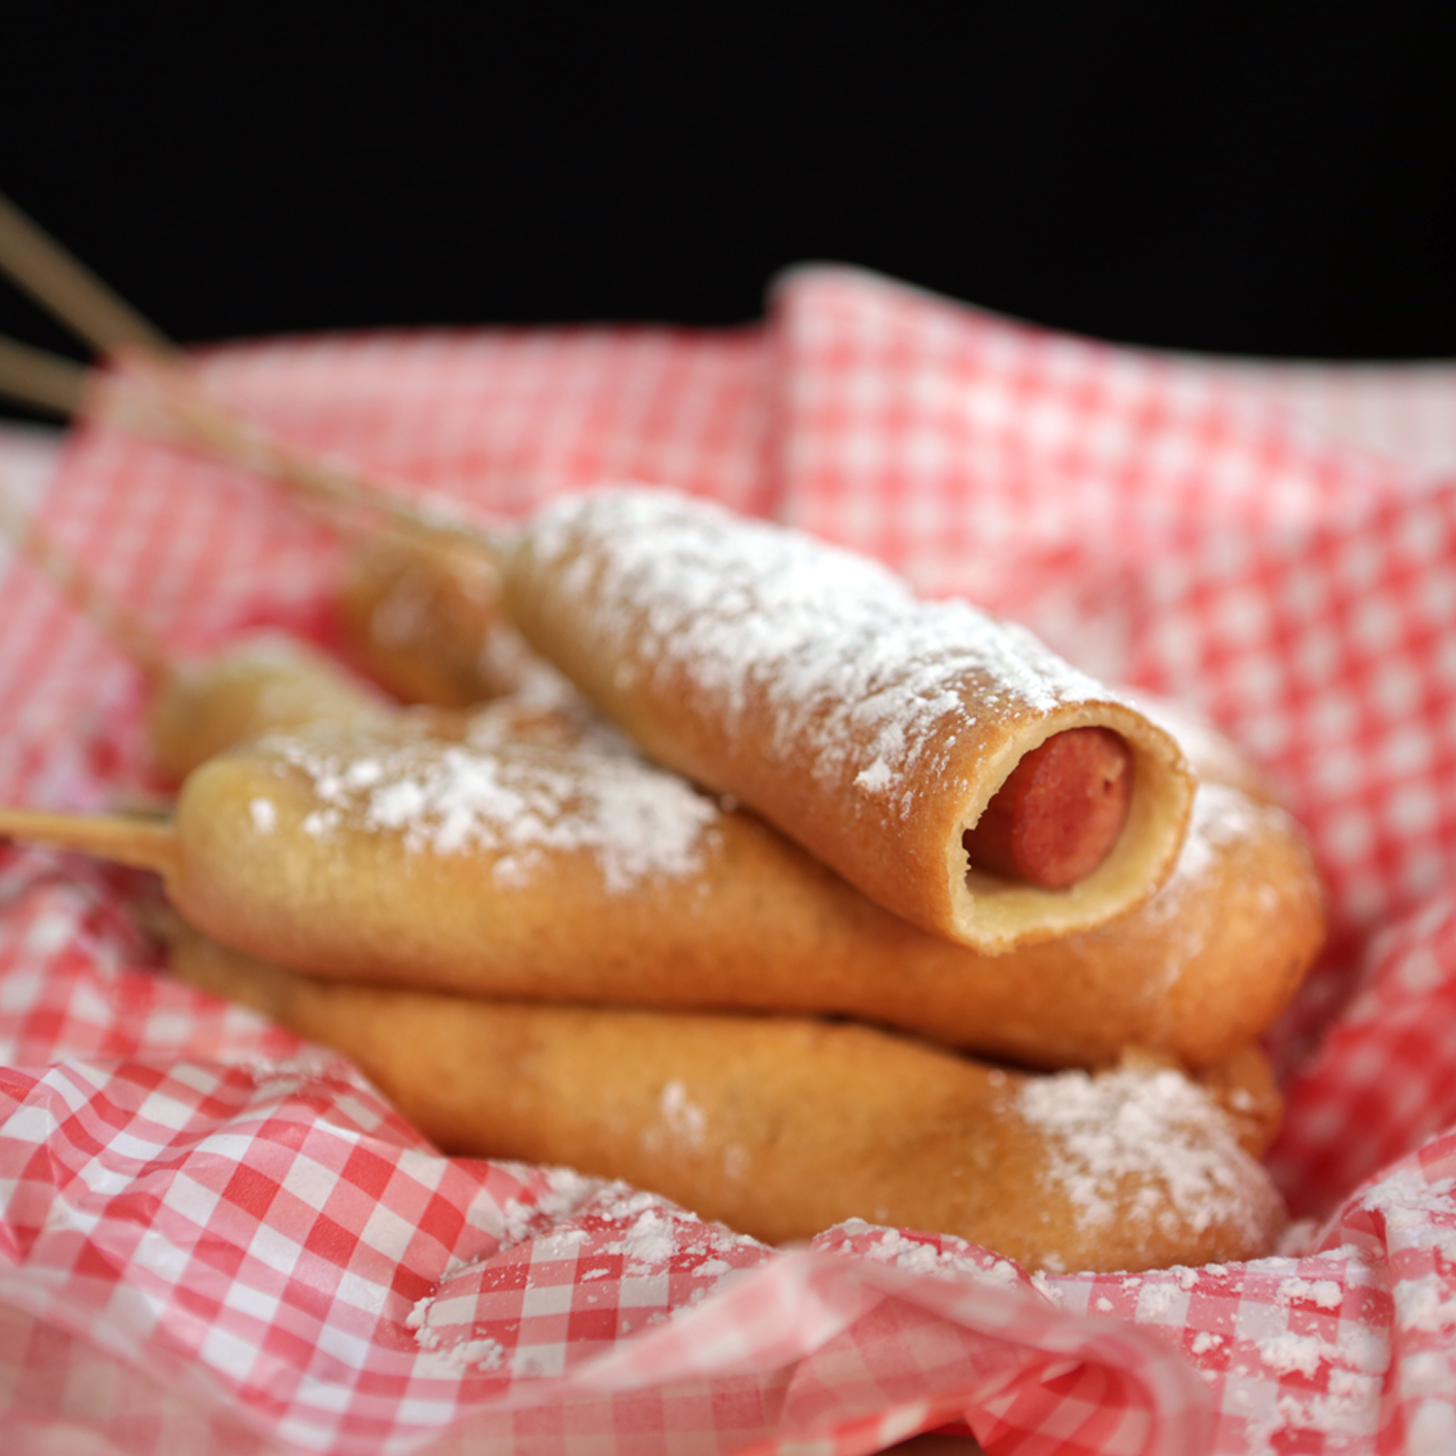 ... hot dogs and funnel cake. Please meet the funnel dog, a sweet-savory